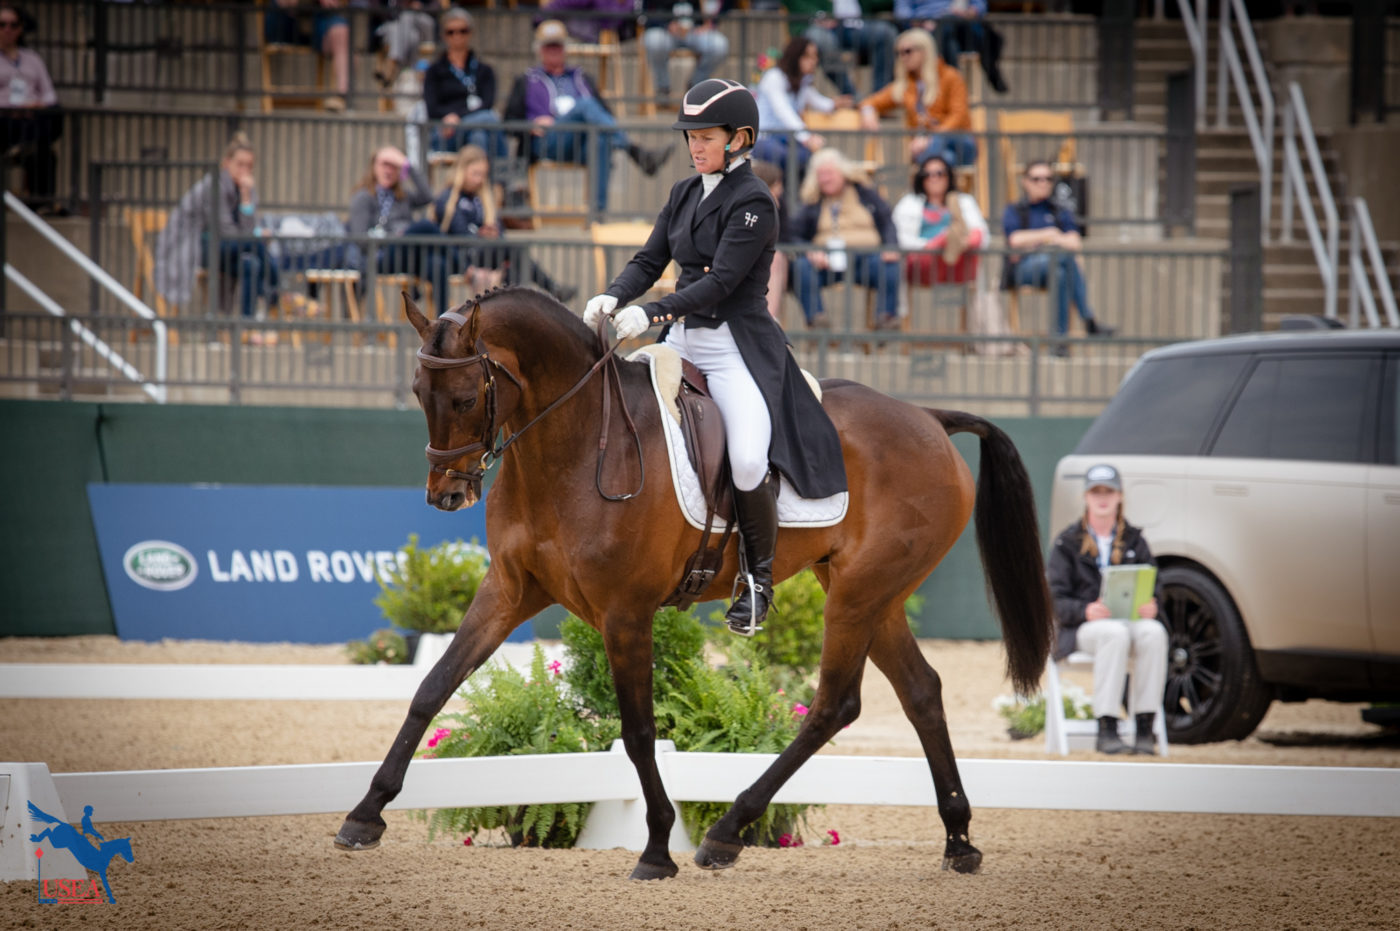 Seated in the 9th place position following dressage is last year's LRK3DE third place rider Jonelle Price riding McClaren. USEA/ Meagan DeLisle photo.